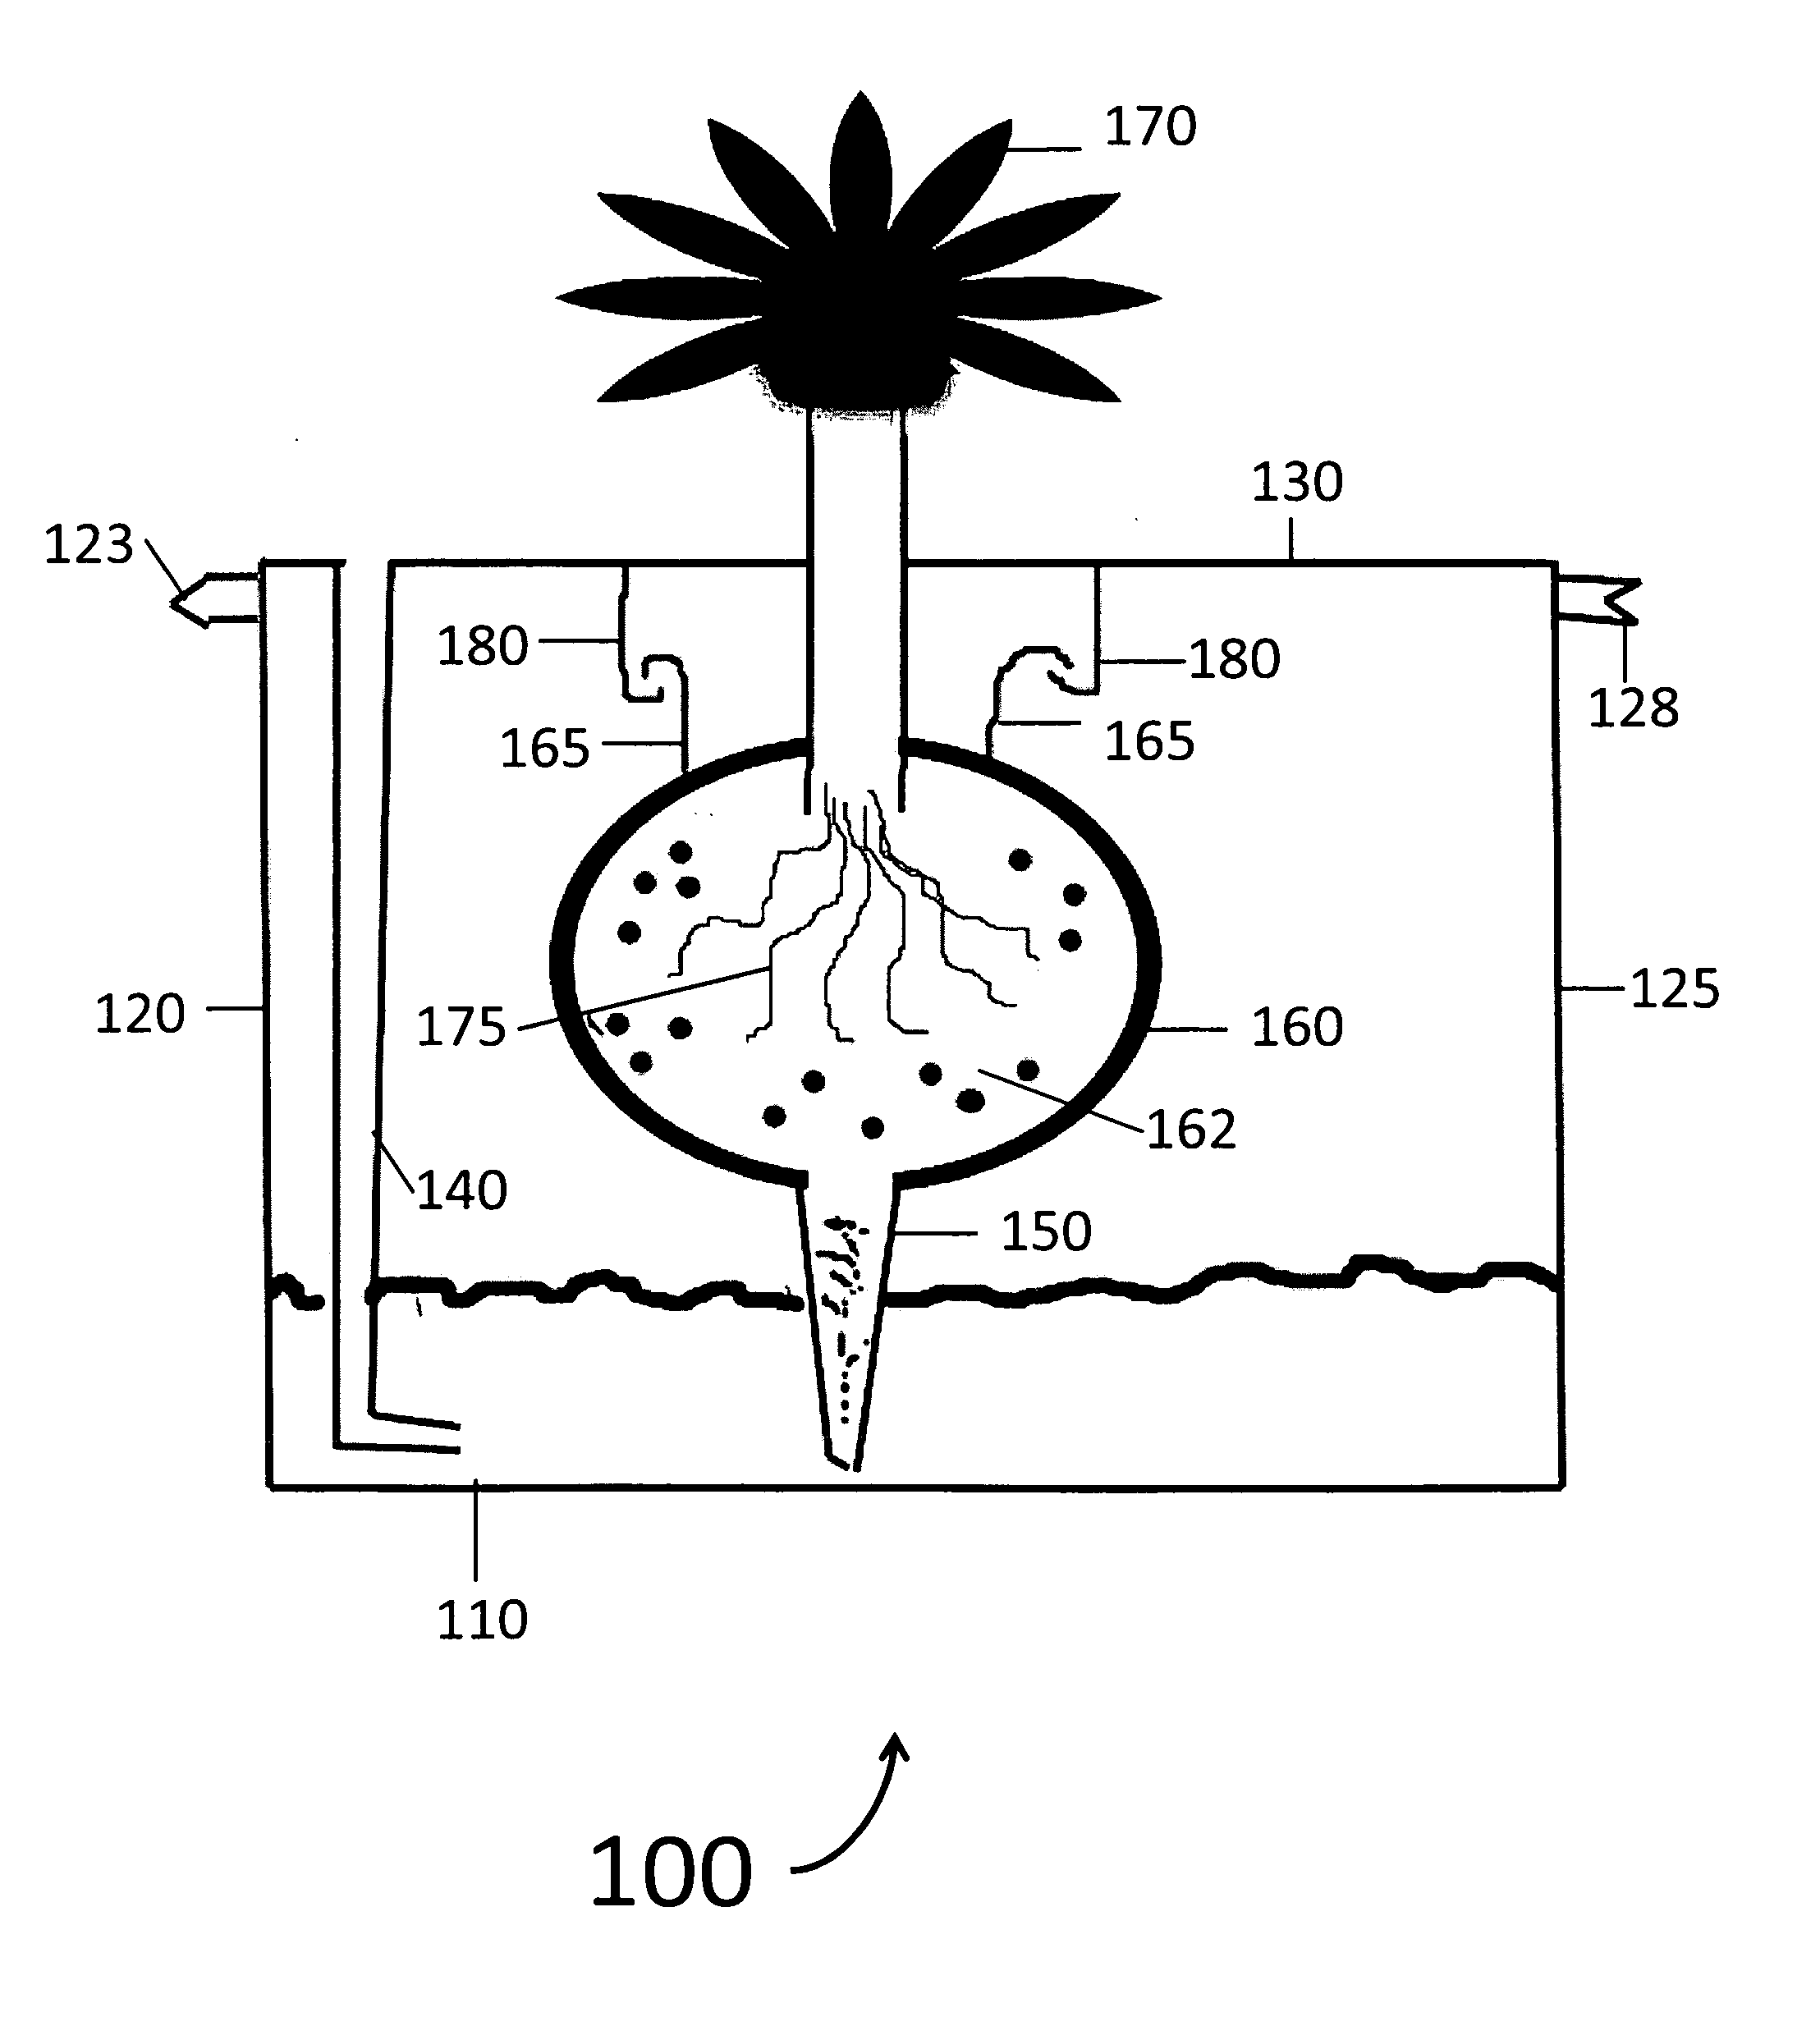 Systems for roof irrigation, including modular apparatus with sub-irrigation technology, and methods for installation and maintenance of systems